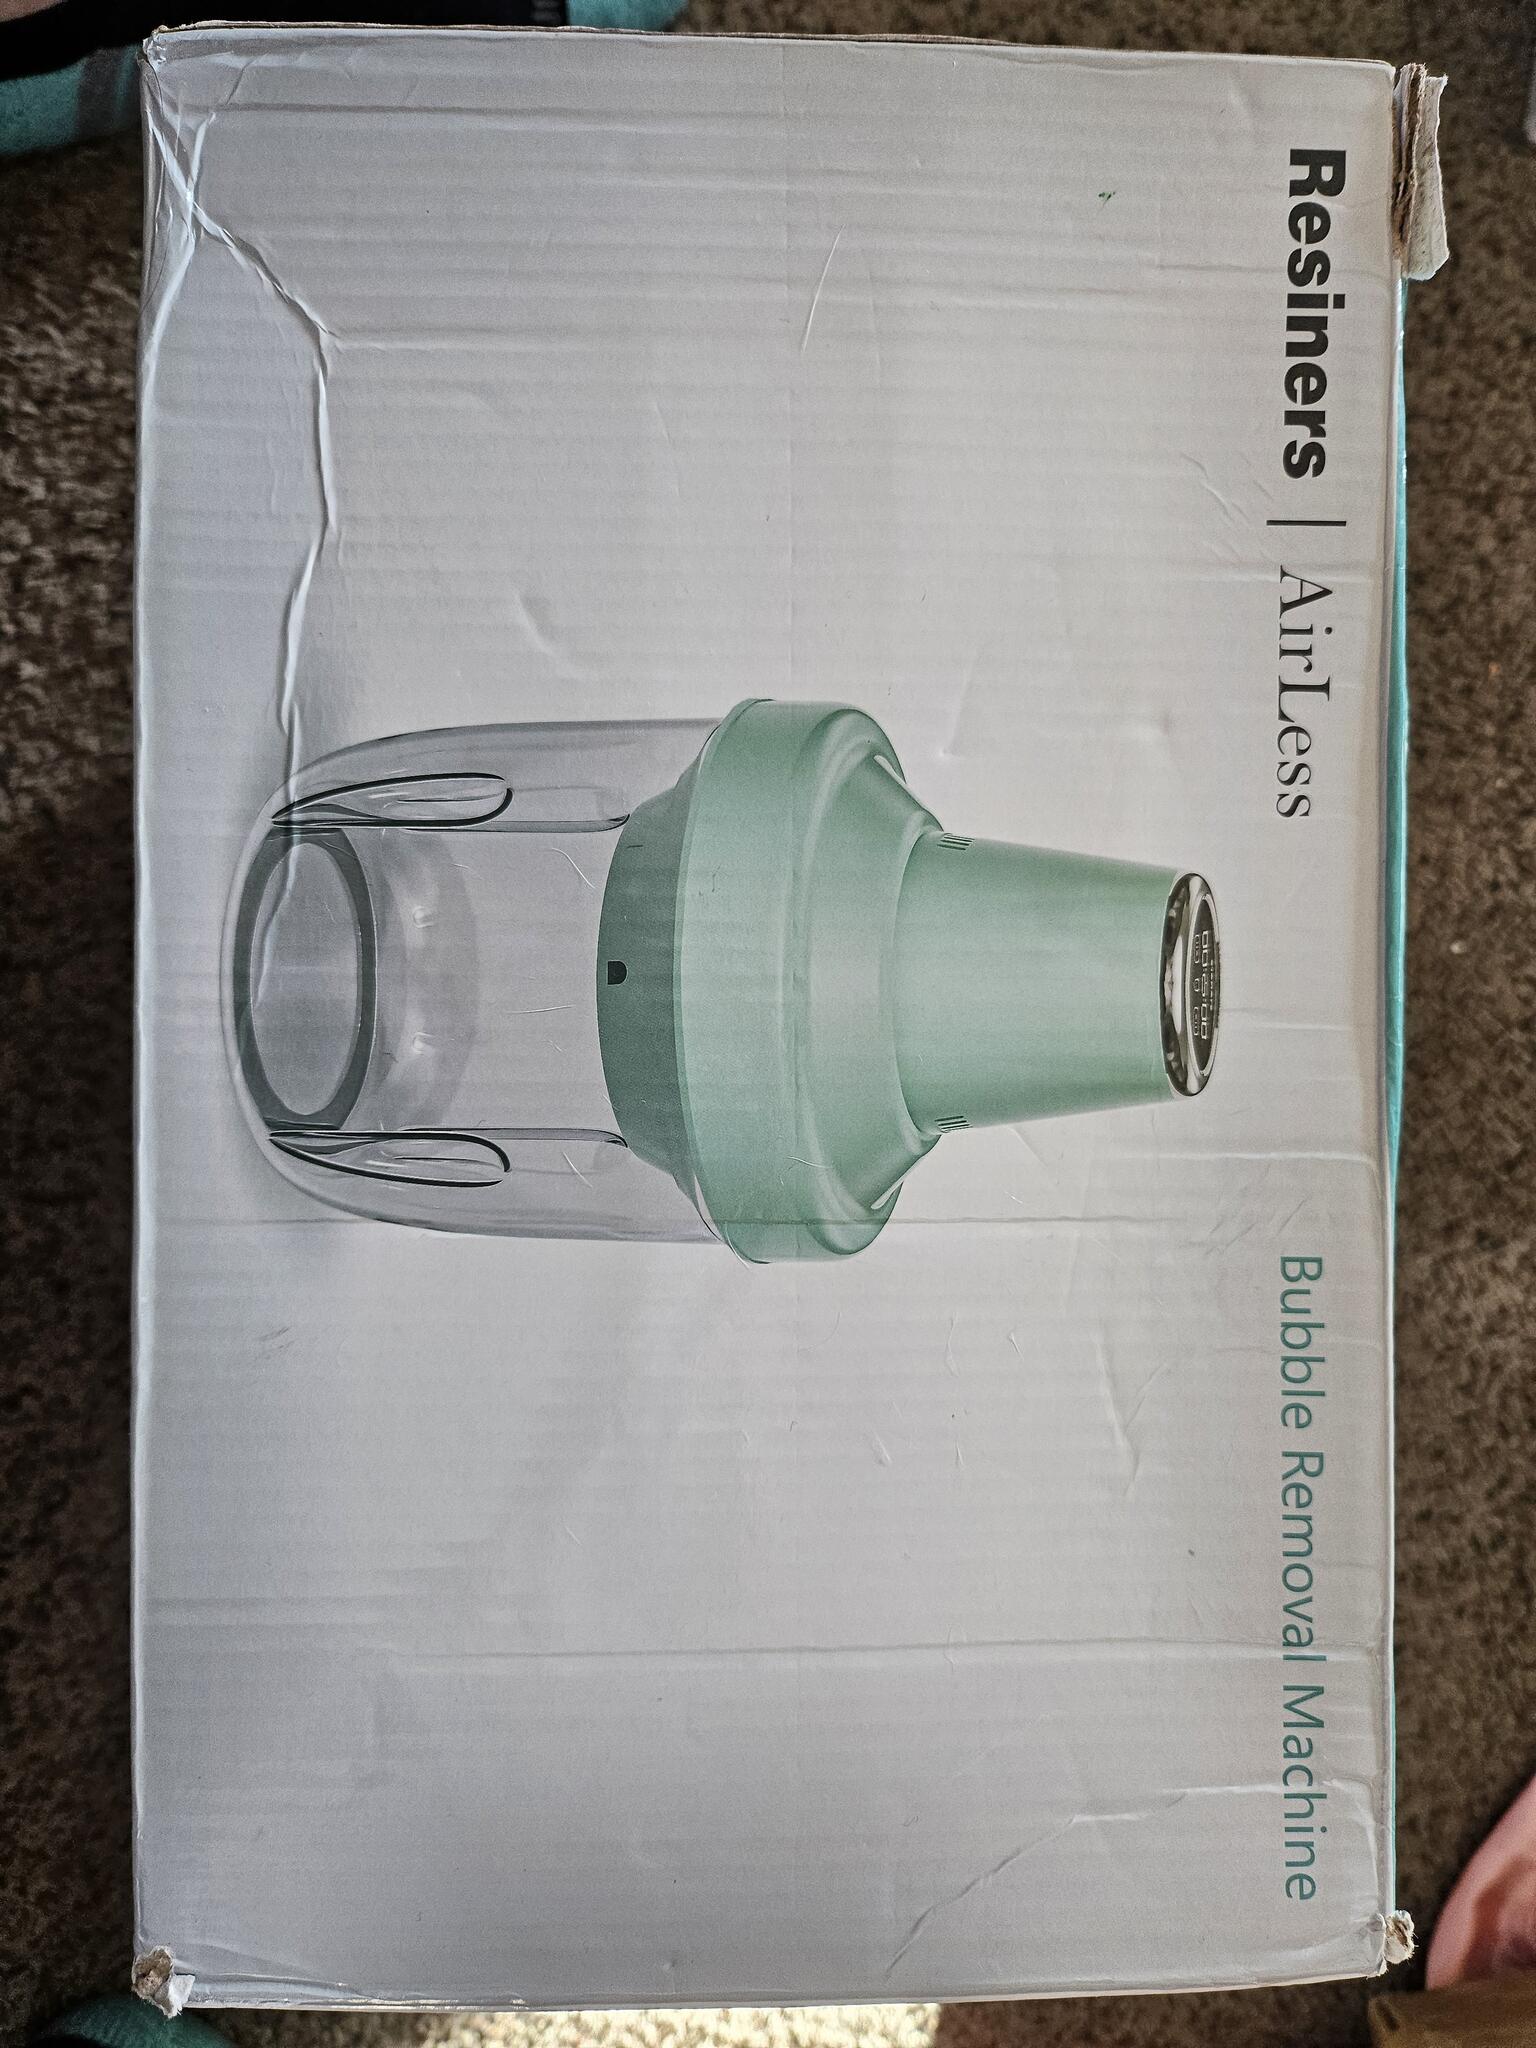 Resiners Resin Bubble Remover For $50 In Palmdale, CA